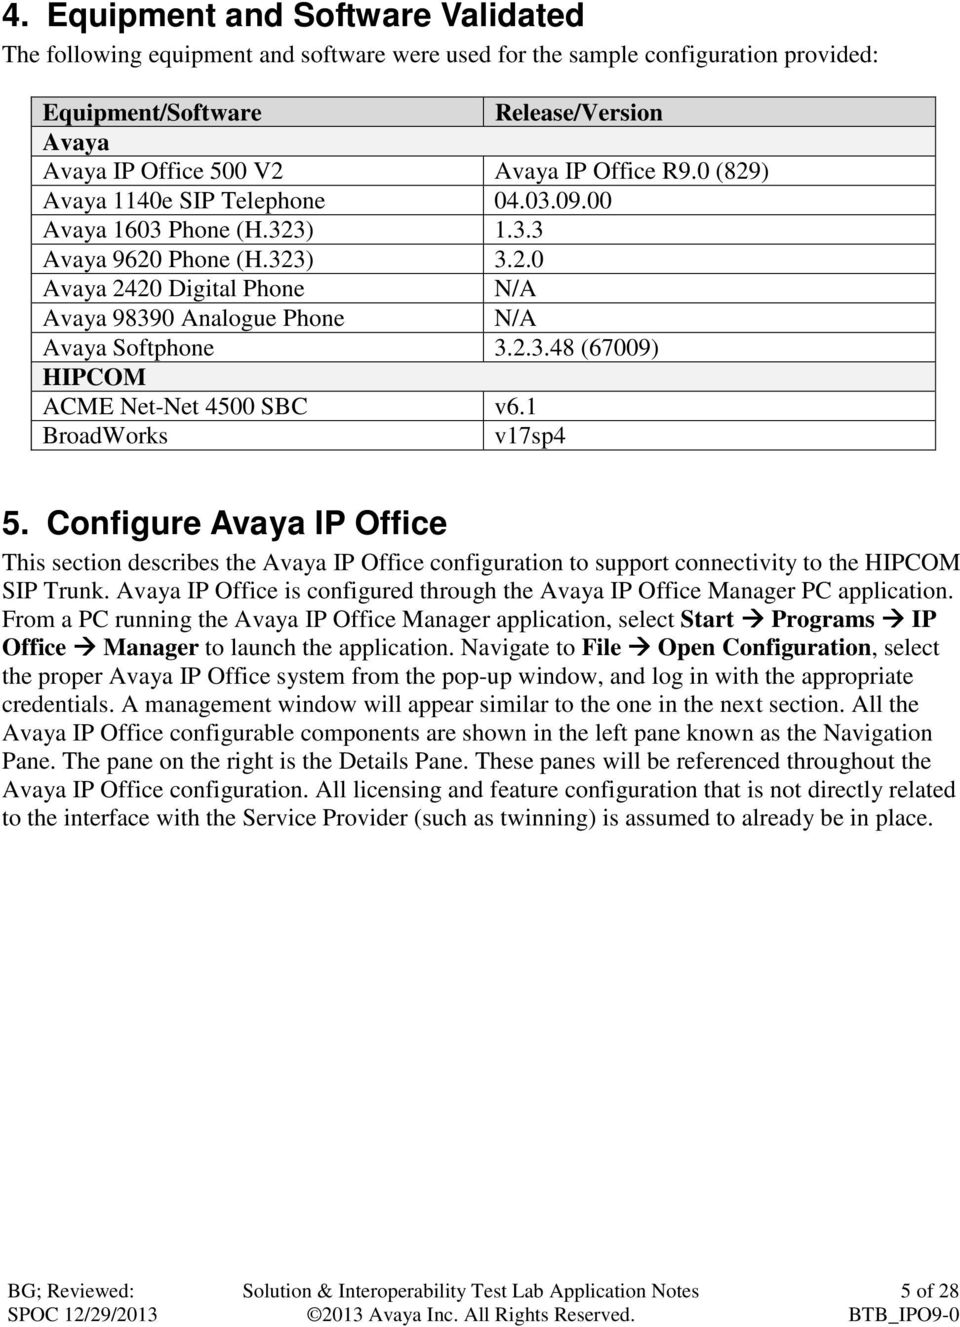 1 BroadWorks v17sp4 5. Configure Avaya IP Office This section describes the Avaya IP Office configuration to support connectivity to the HIPCOM SIP Trunk.